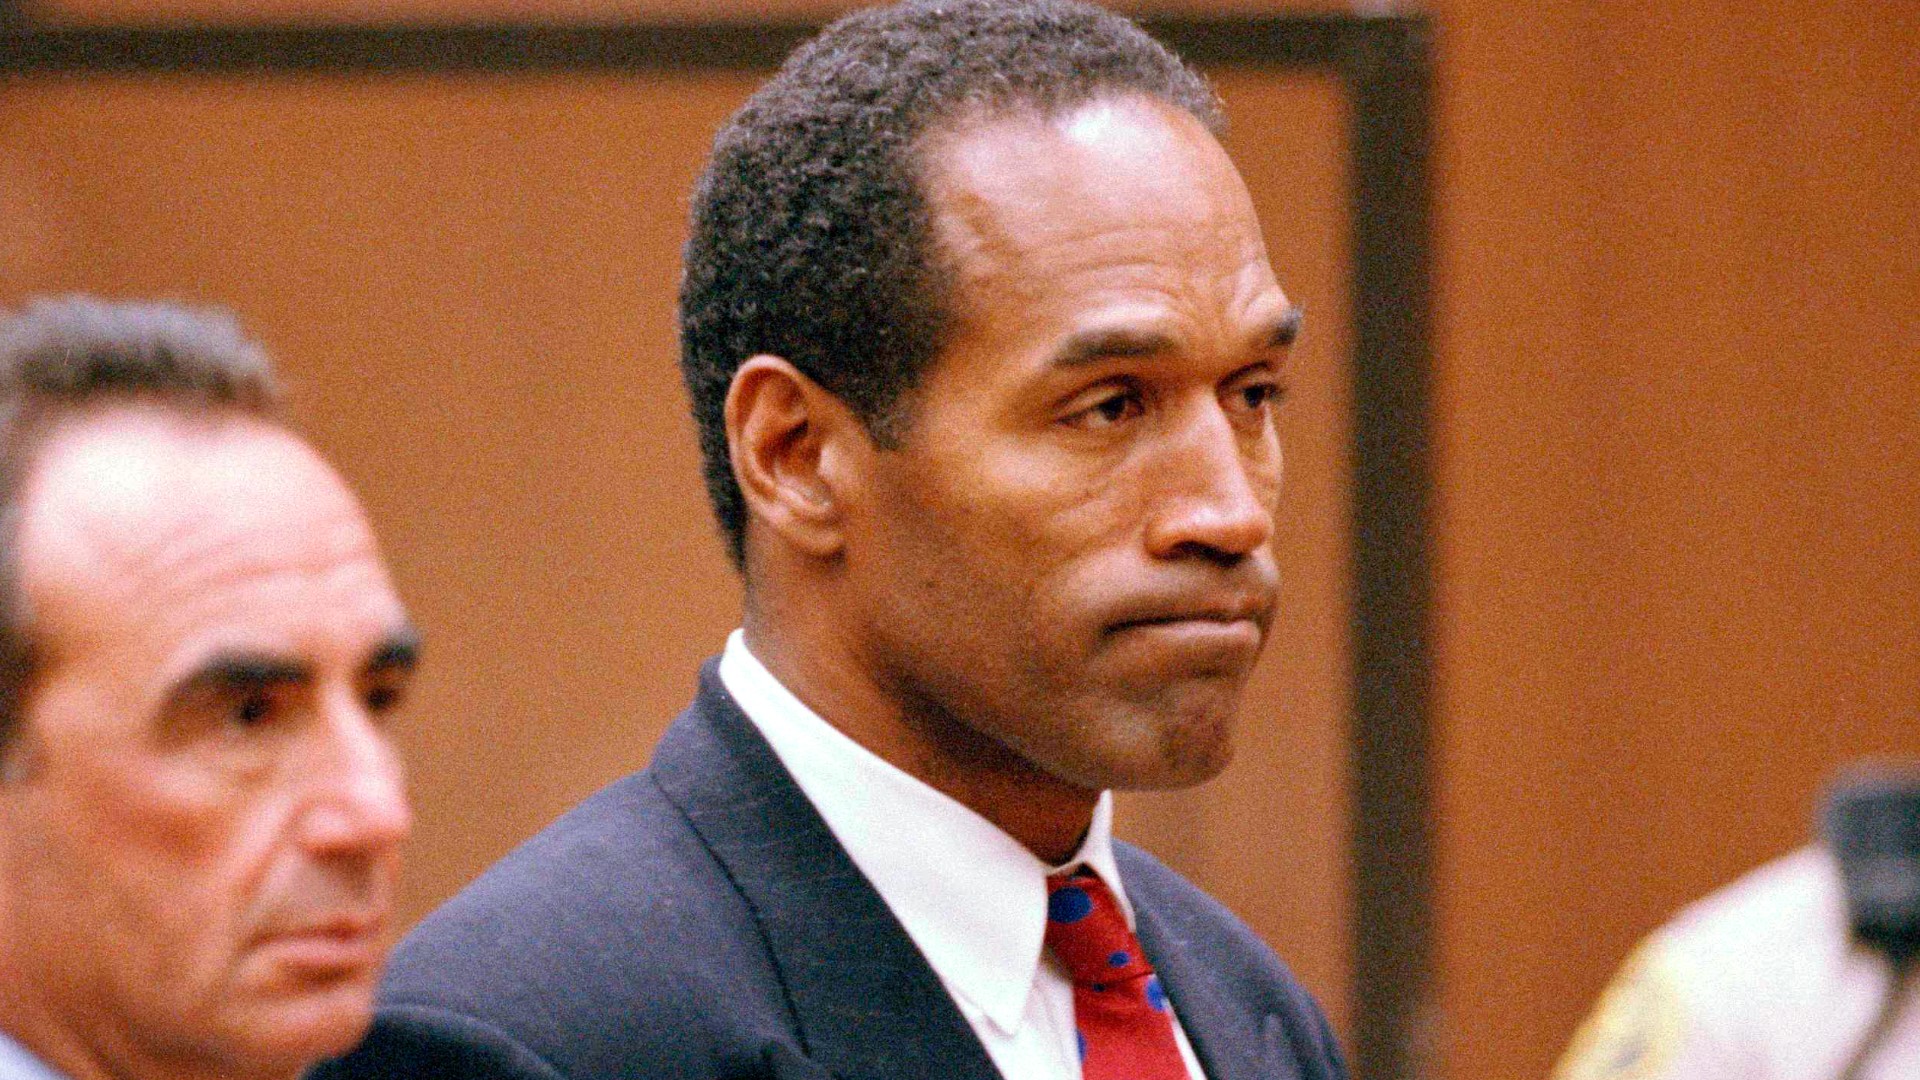 The family of O.J. Simpson announced on his official X account that he died Wednesday after battling cancer.